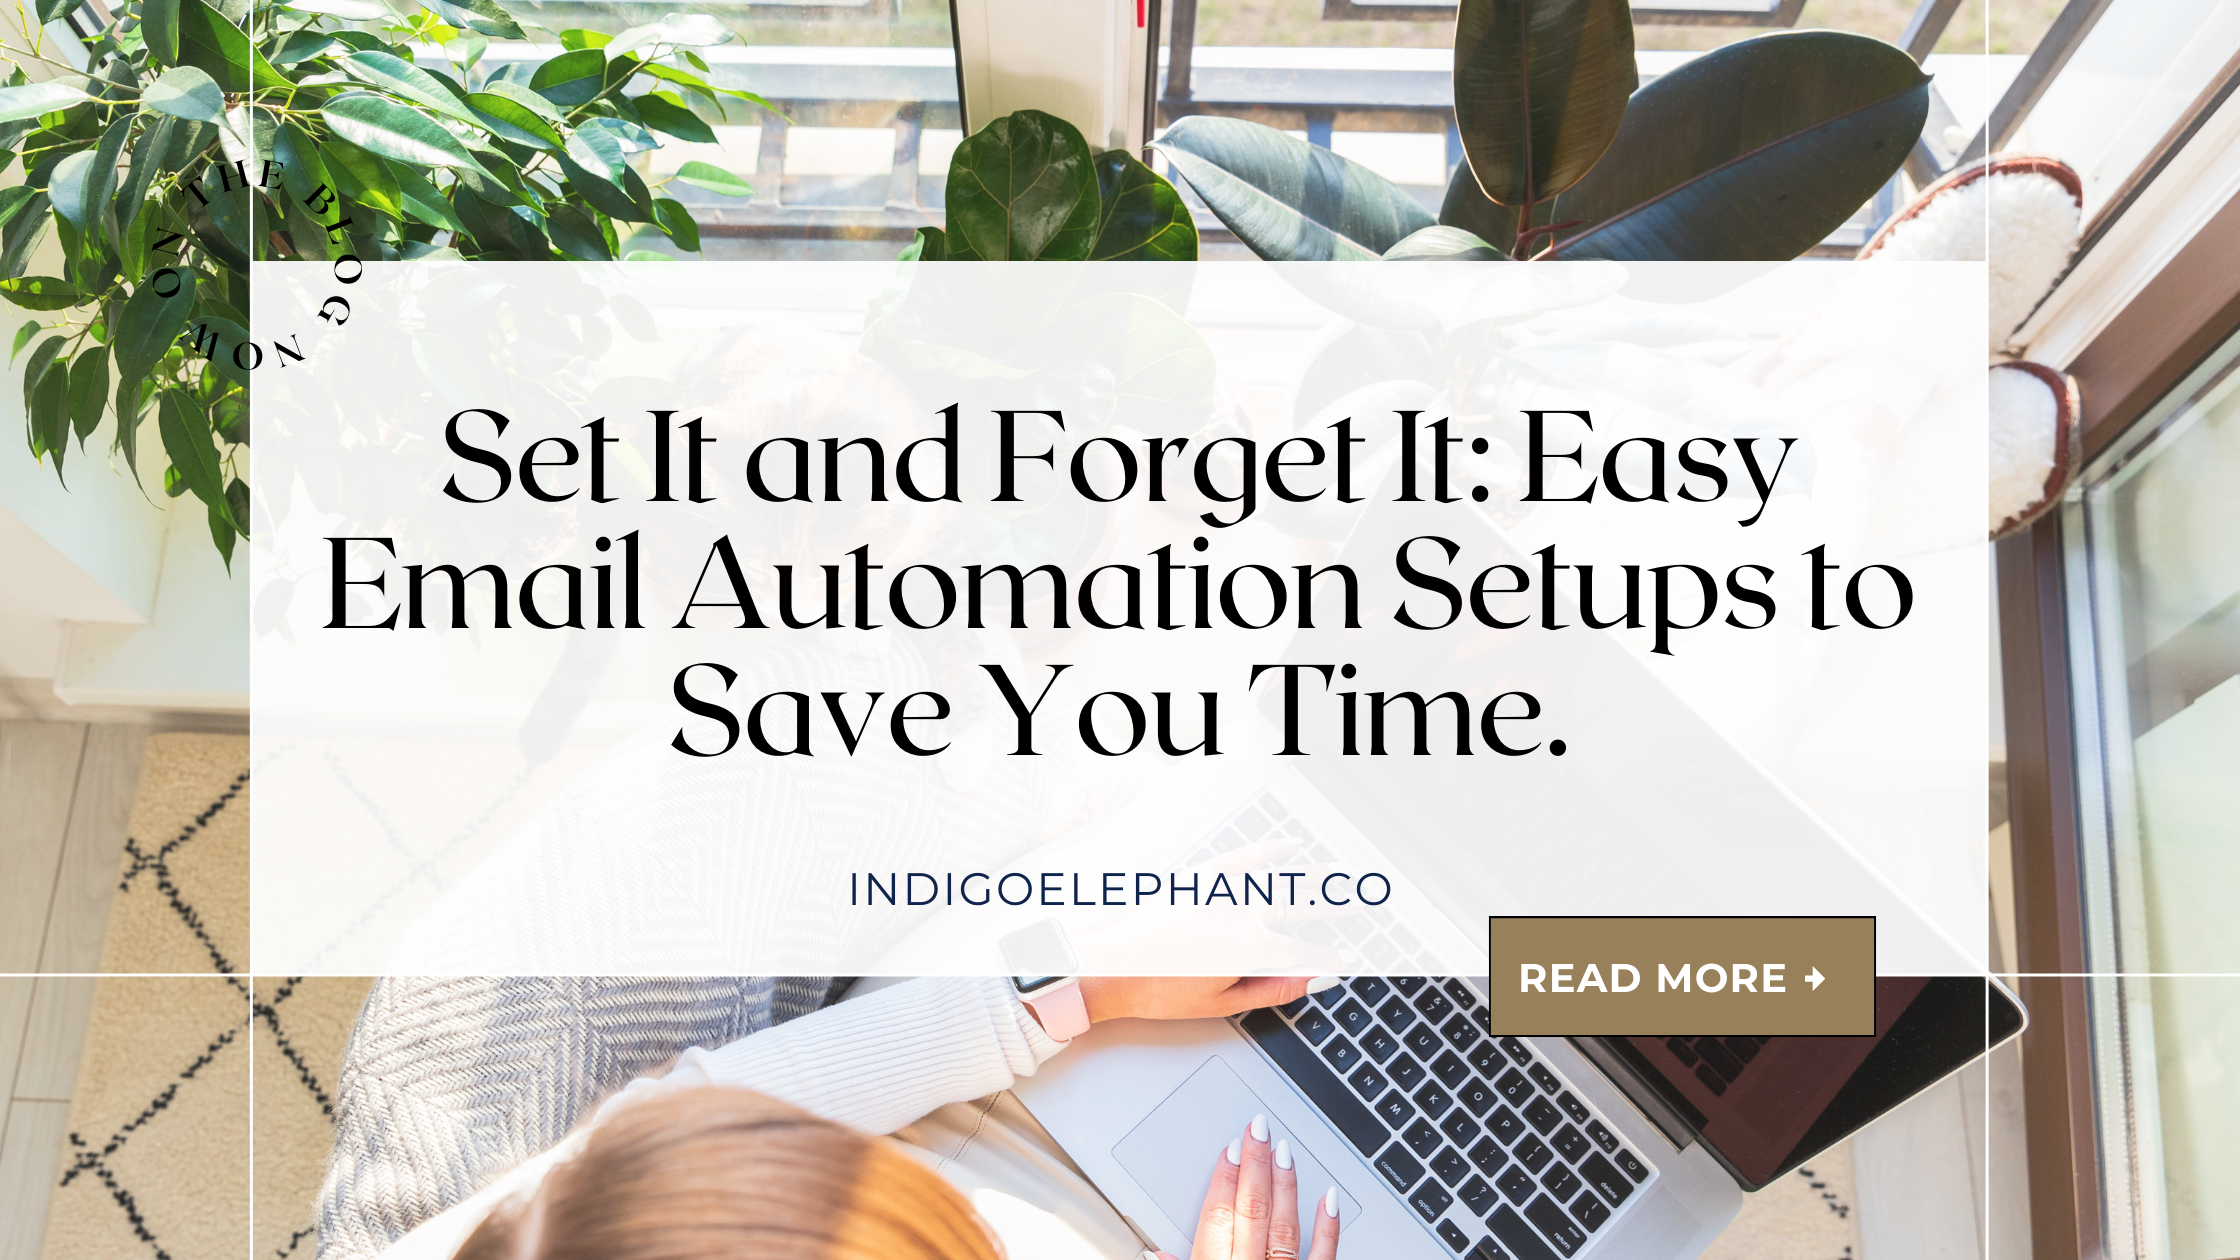 Set It and Forget It: Easy Email Automation Setups to Save You Time